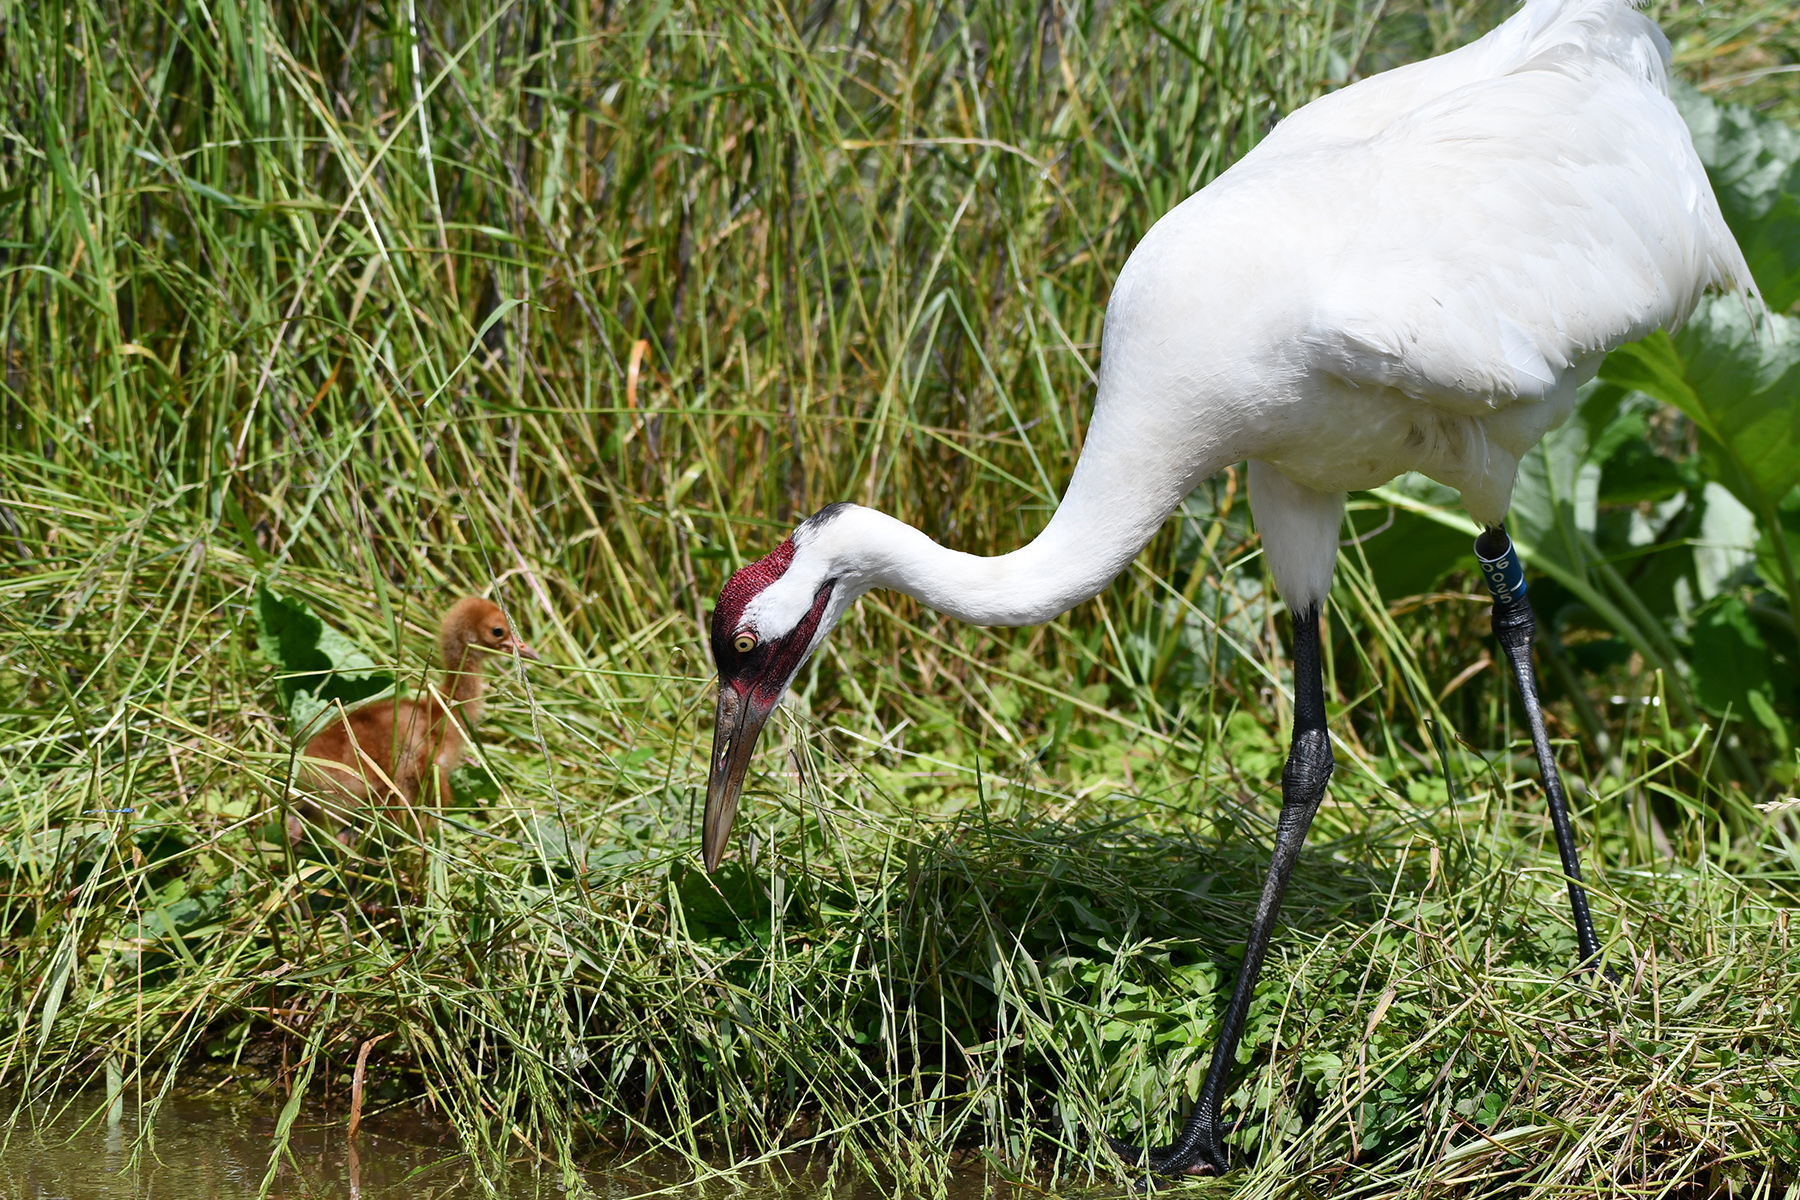 A whooping crane chick pictured with its surrogate parent.